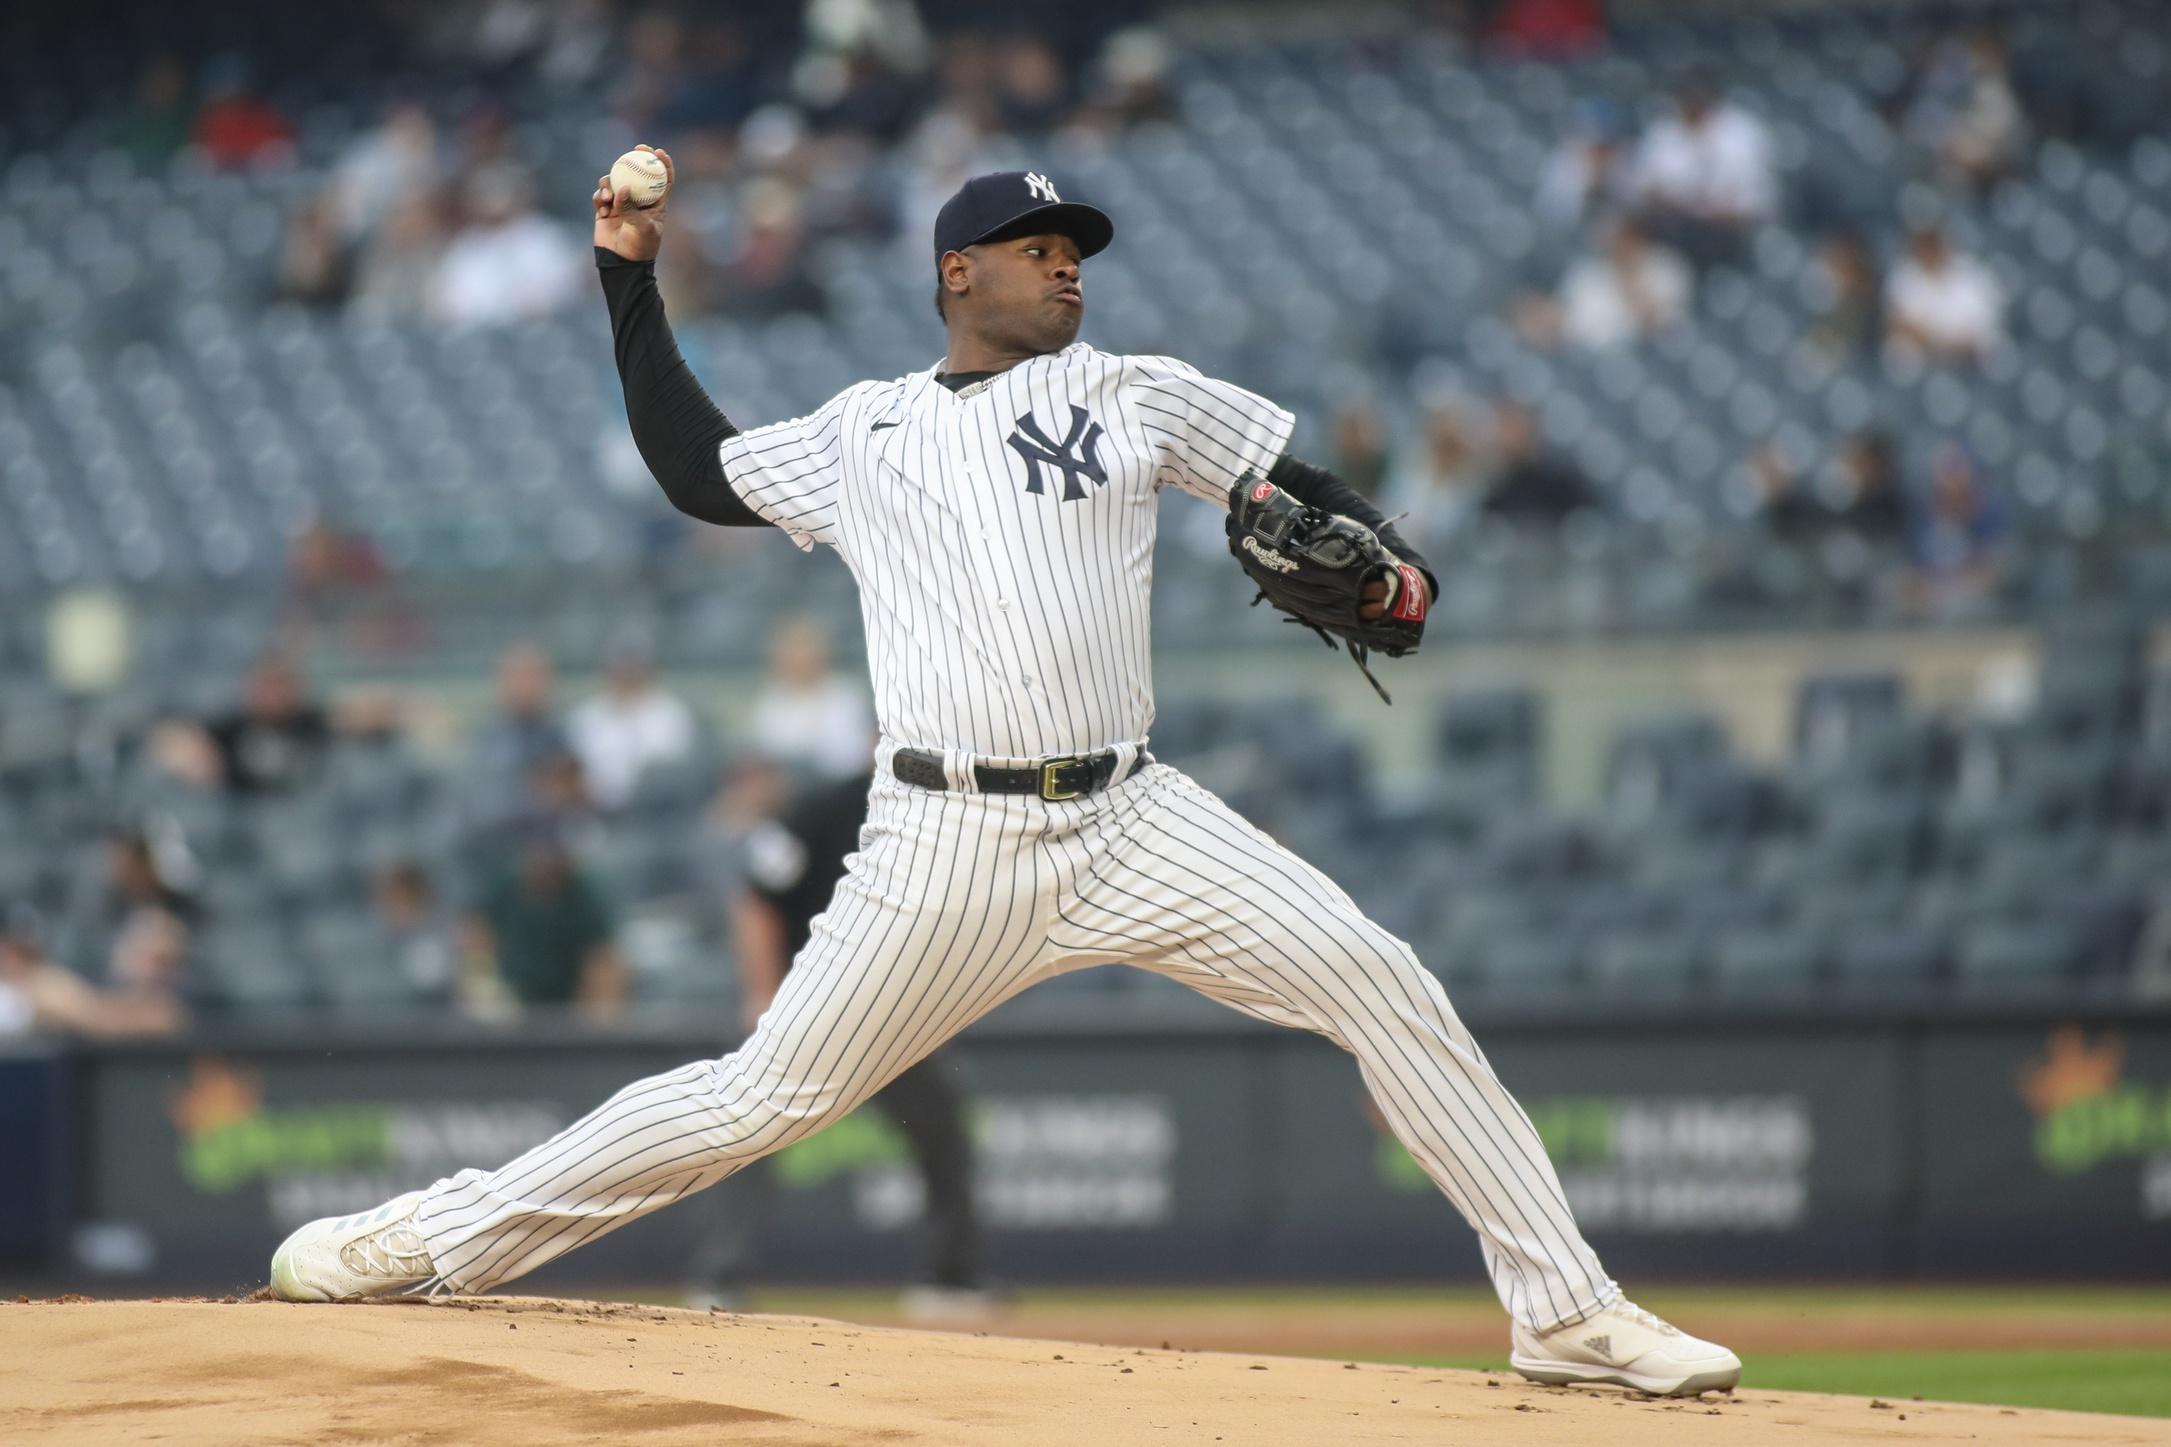 New York Yankees starting pitcher Luis Severino (40) pitches in the first inning against the Chicago White Sox at Yankee Stadium. / Wendell Cruz-USA TODAY Sports